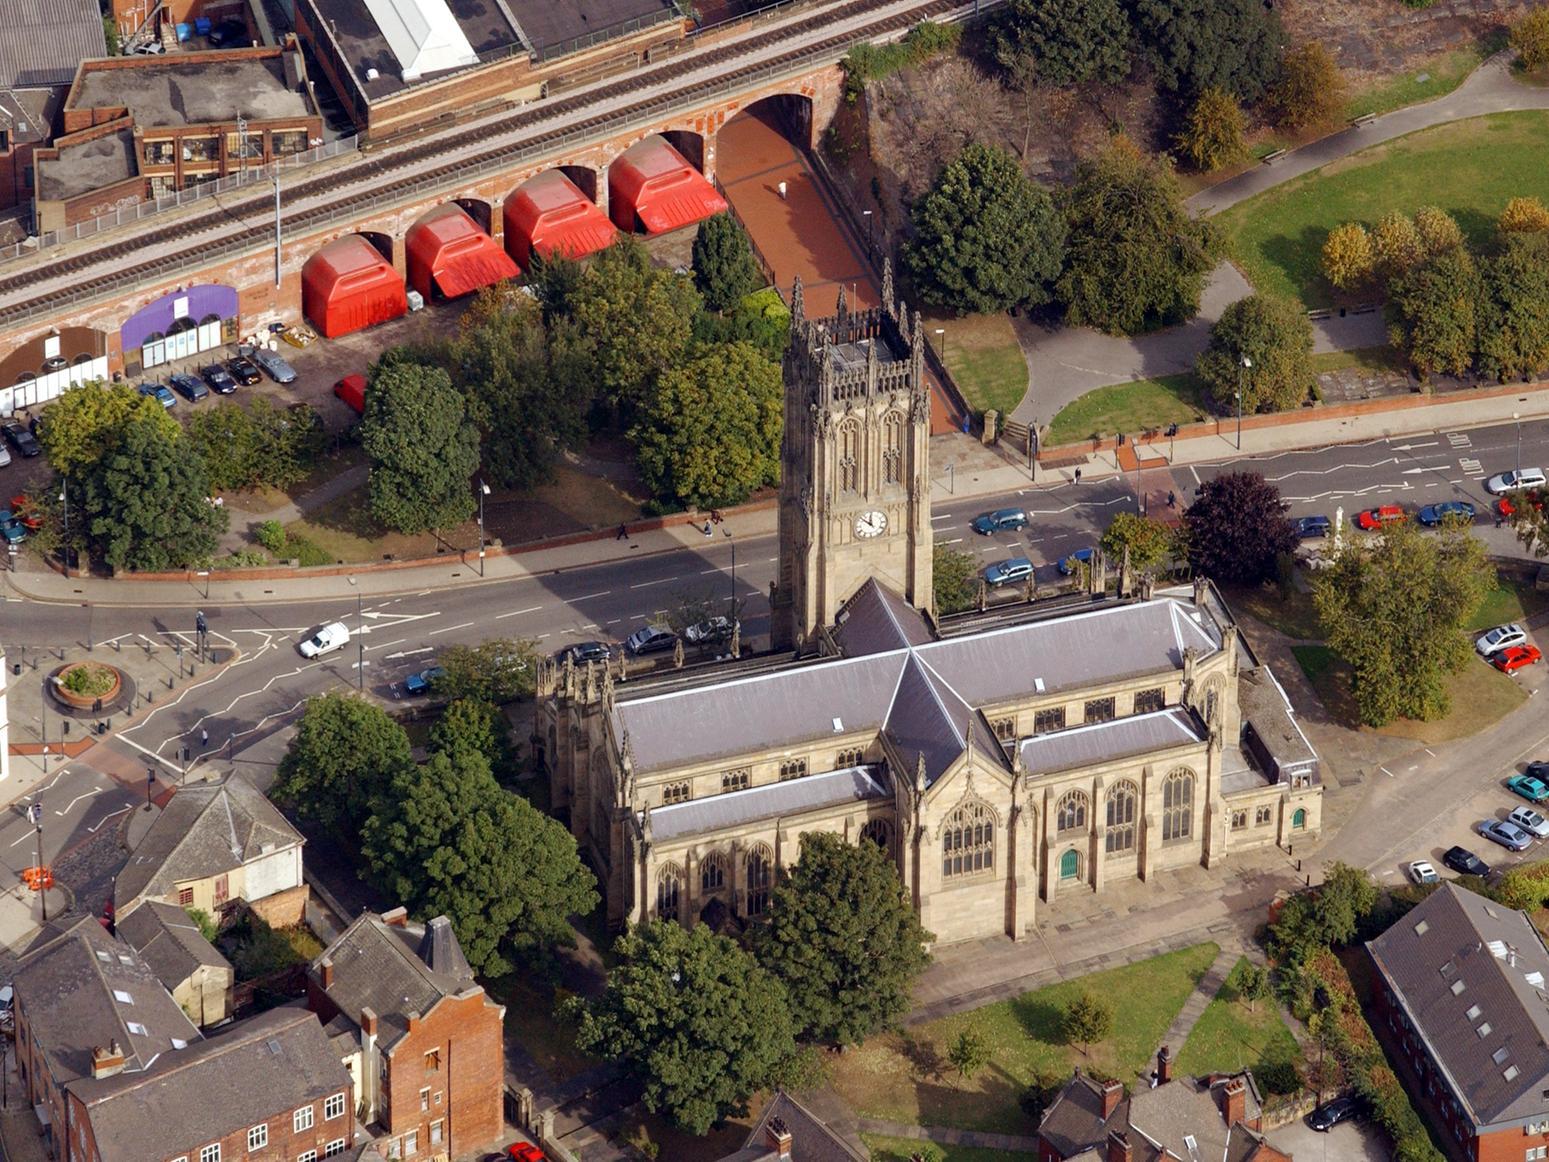 Recognise this landmark? Leeds Parish Church in 2003 which was granted Minster status in 2012 to recognise the Queen's Diamond Jubilee year.